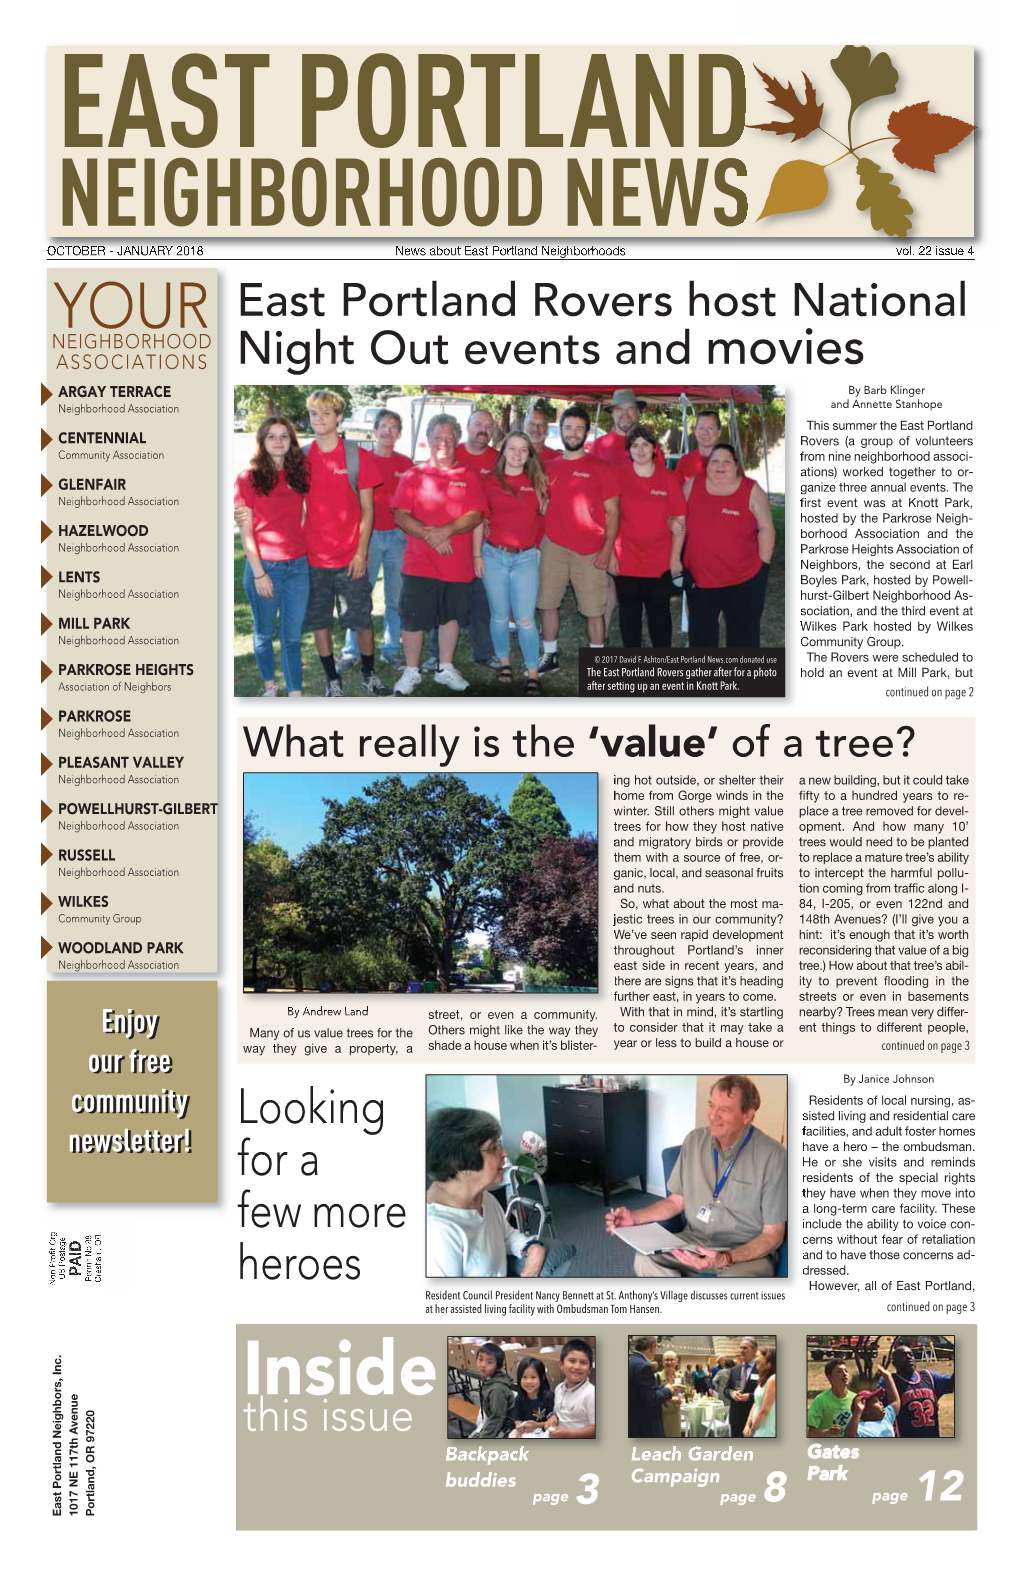 Inside This Issue Backpack Leach Garden Gates Buddies Campaign Park Page 3 Page 8 Page 12 East Portland Neighbors, Inc